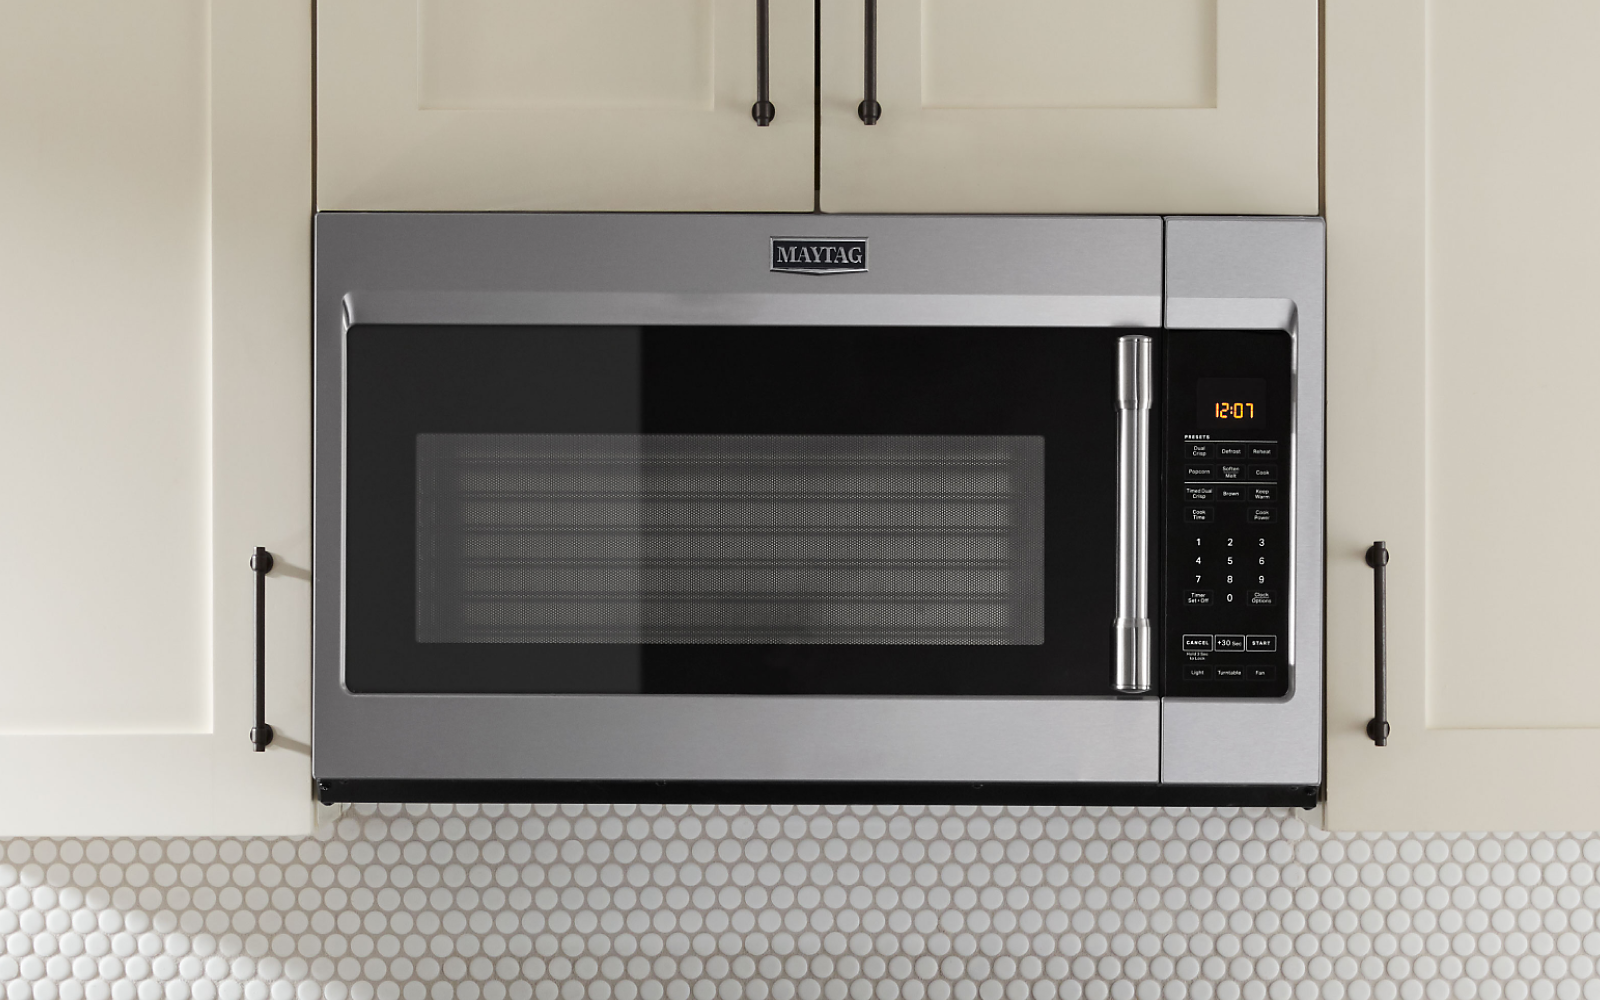 Maytag® over-the-range microwave between white cabinets